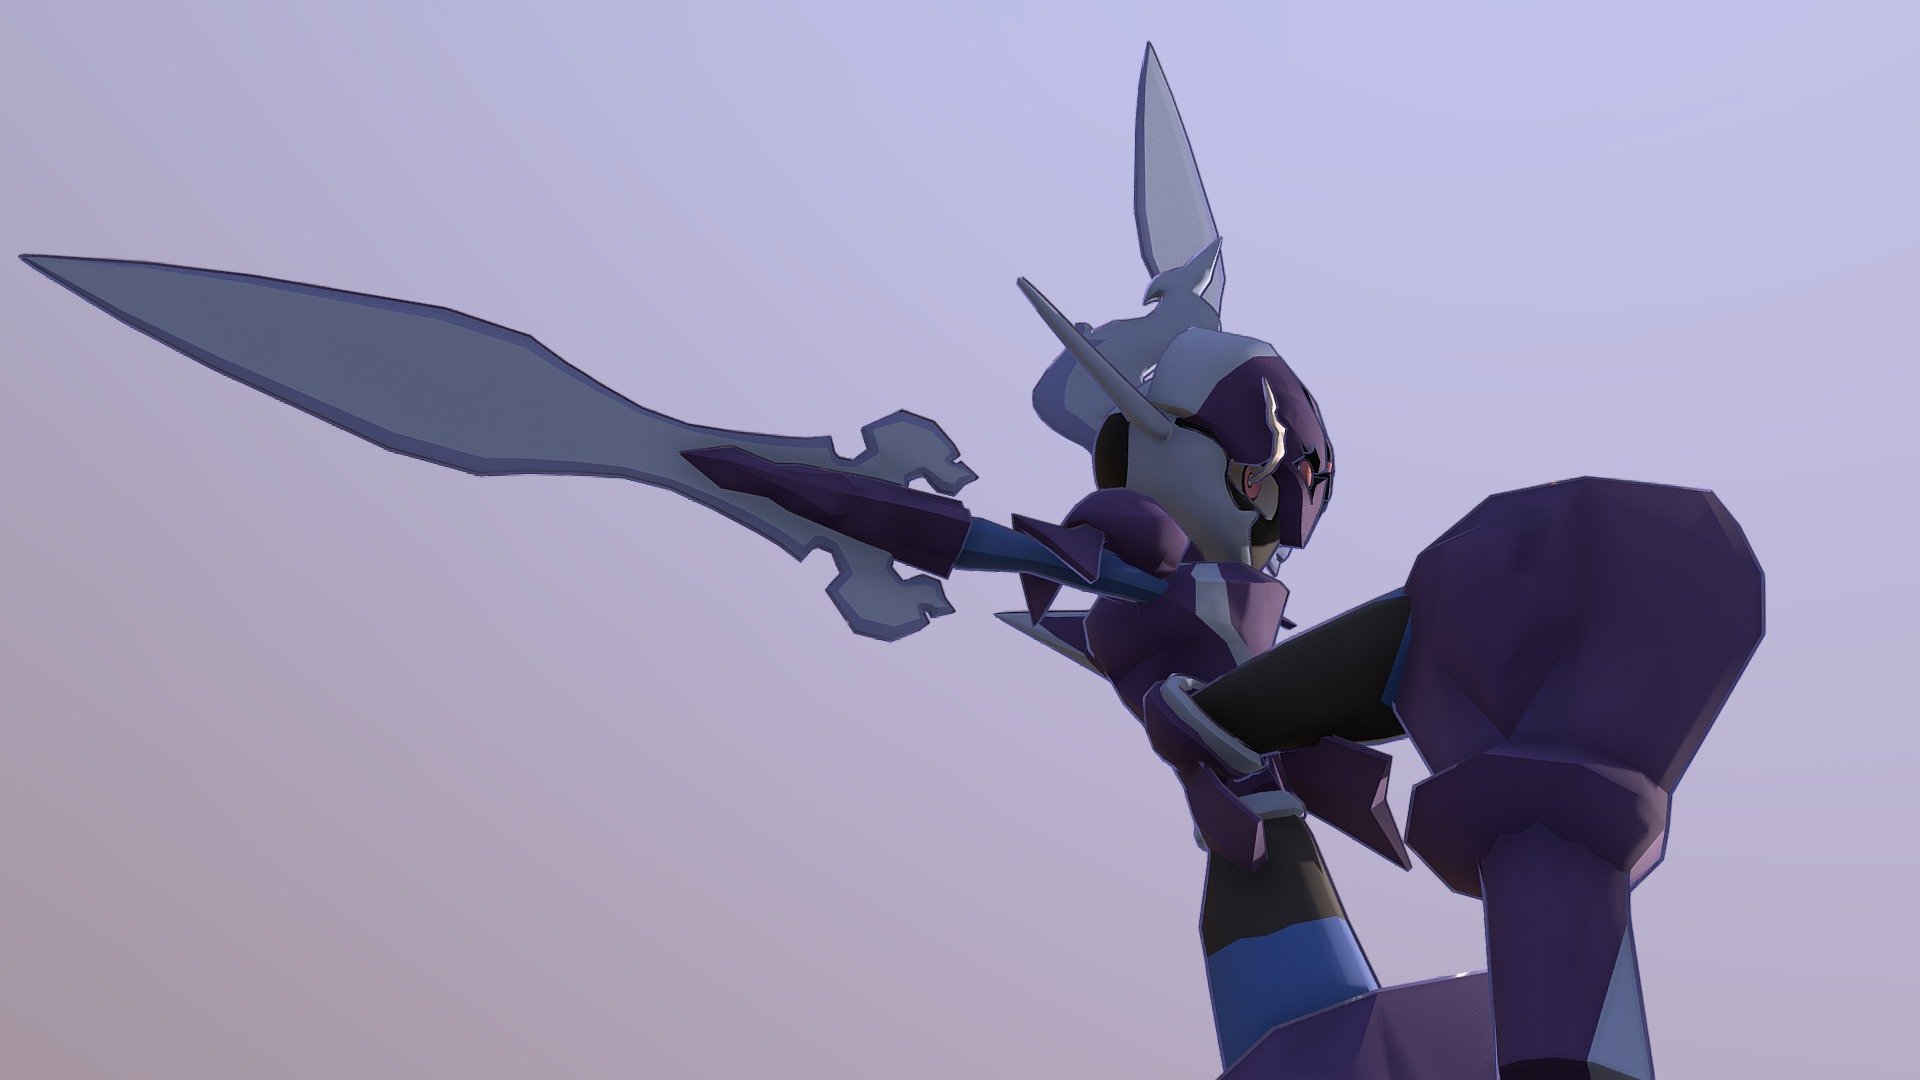 With the upcoming release of Pokemon Violet and Scarlet
I challenged myself to model Ceruledge.

I couldn’t put the rigg version on sketchfab so you must download the additional files containing the blender files ( Ceruledge.zip)
To open the blender file you must be in 3.1 or later version.

This model is rigged and I made some poses !

Please don't forget to credit me if you use it for your work:) - Pokemon Violet and Scarlet - Ceruledge - ソウブレイズ - Buy Royalty Free 3D model by Kaijin (@Kaijin13) 3d model